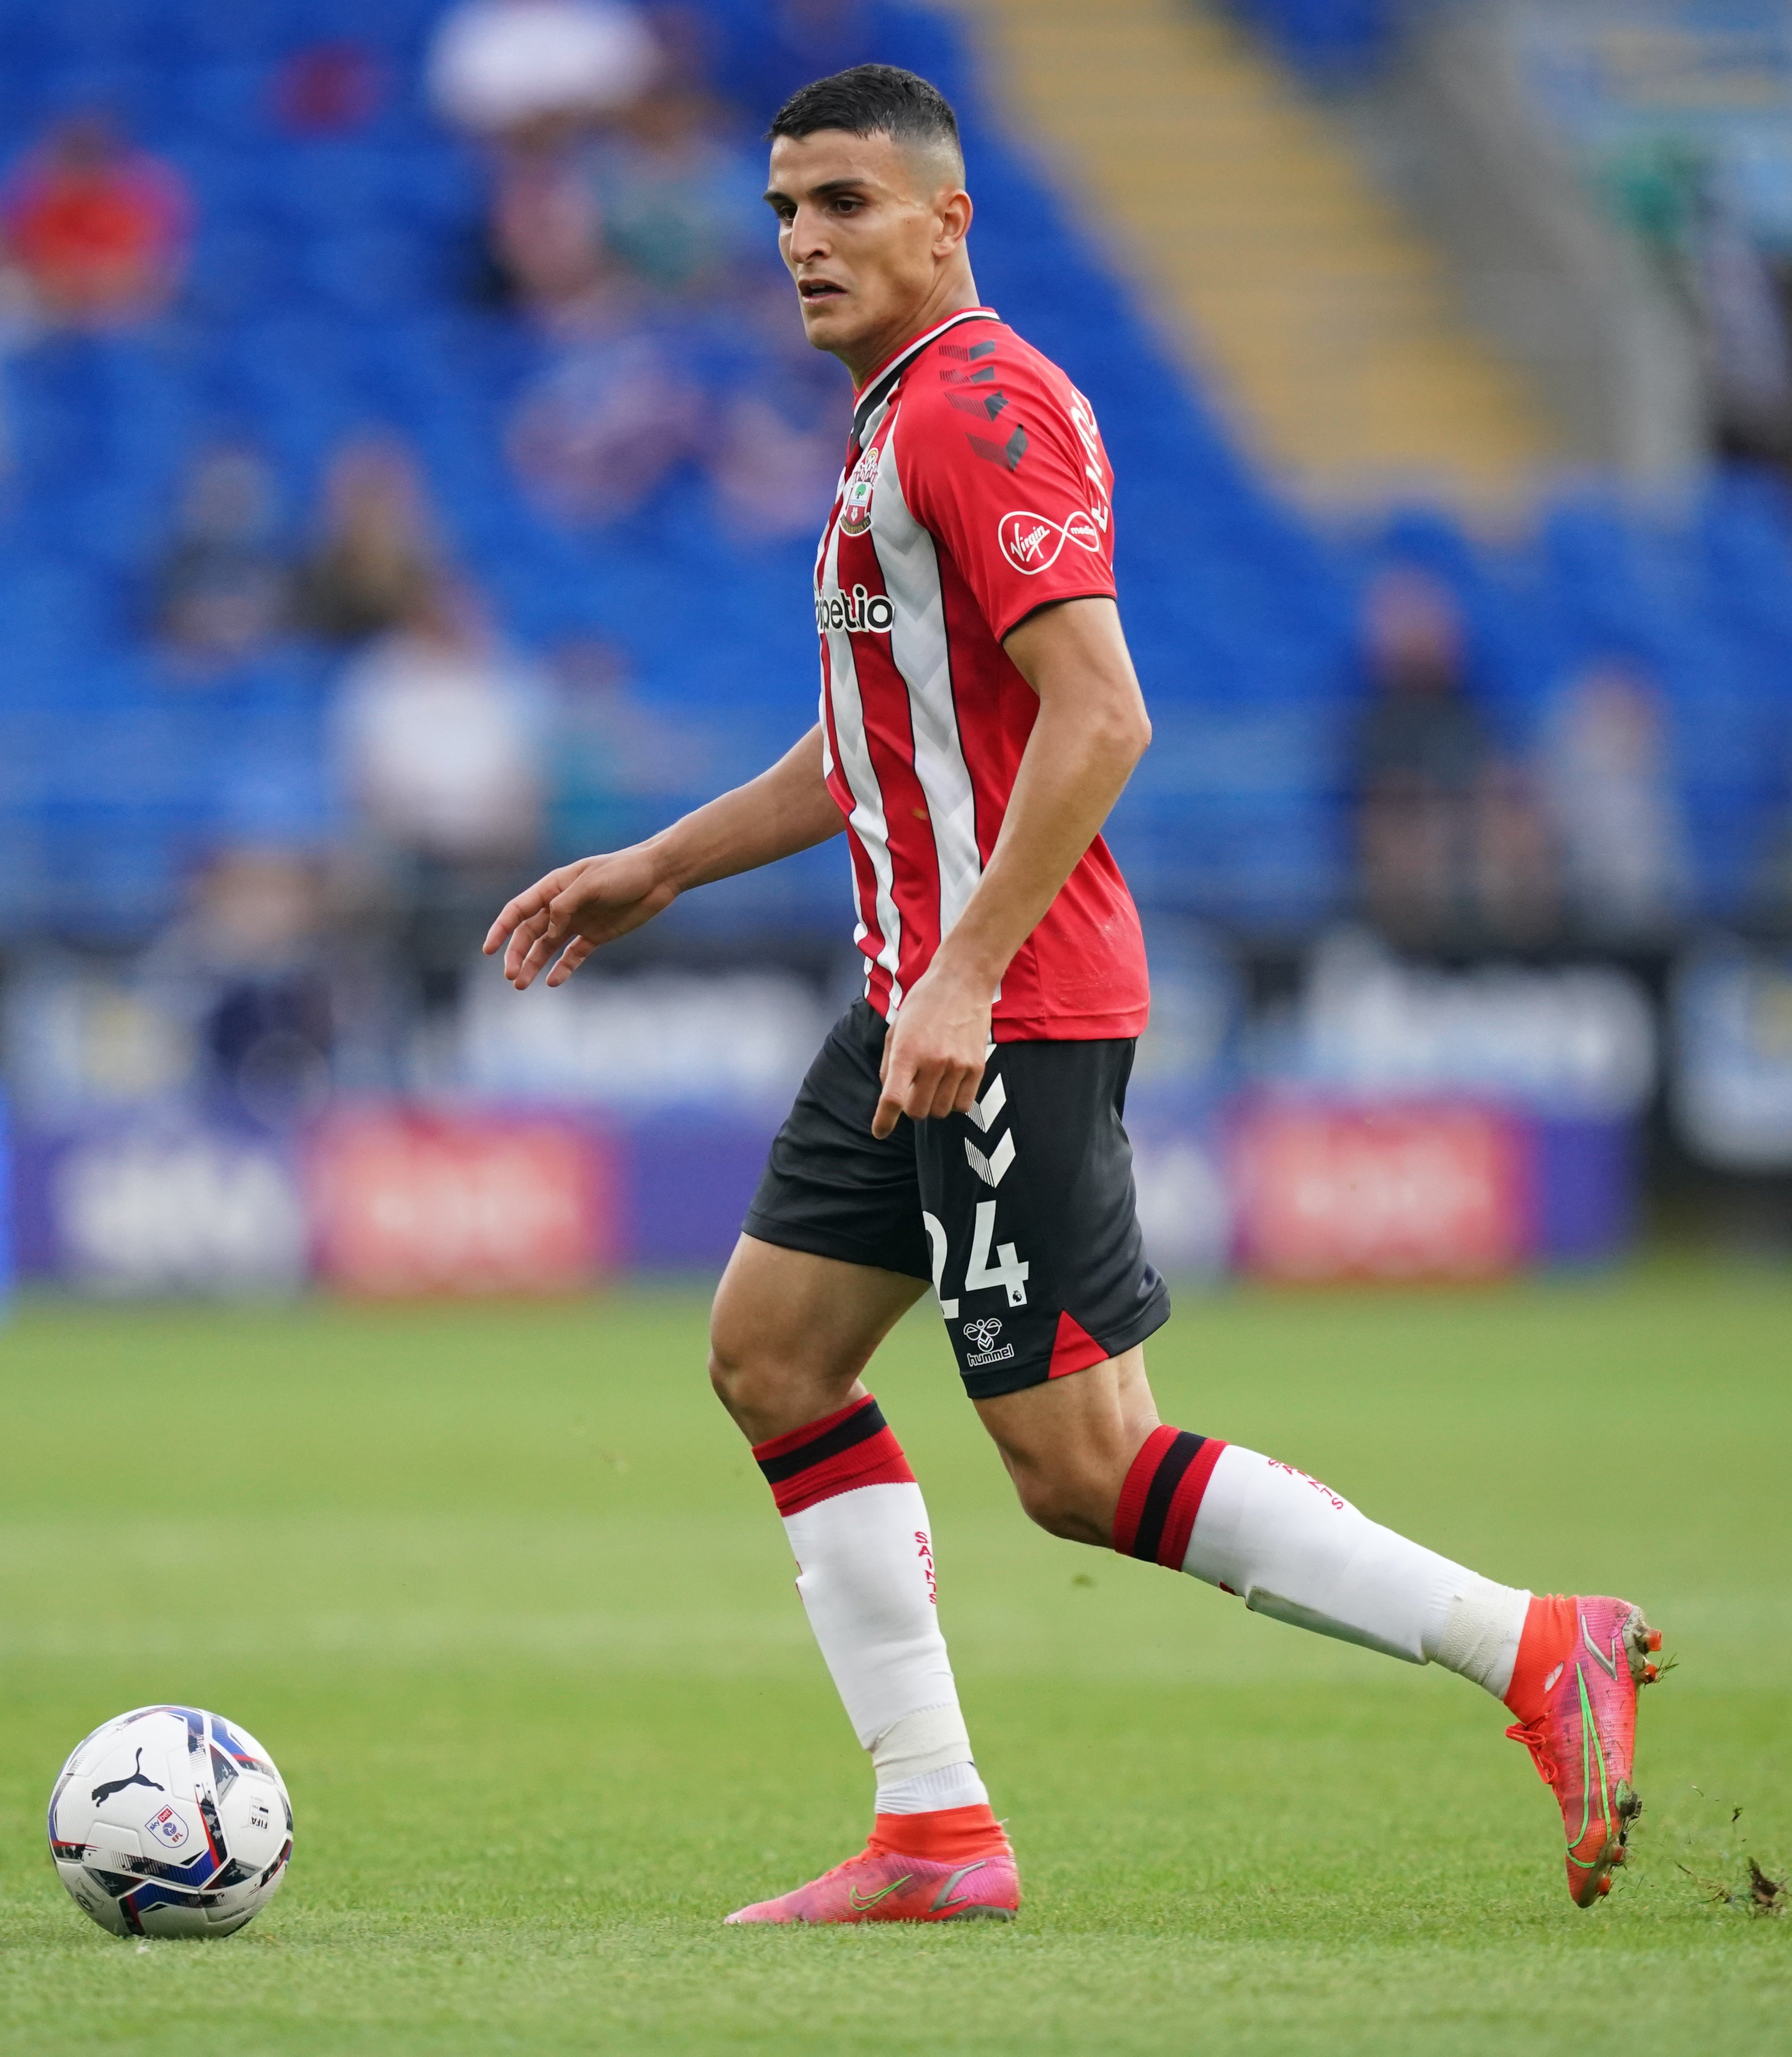 Southampton forward Mohamed Elyounoussi will need a few days to recover from the surgery (Nick Potts/PA)